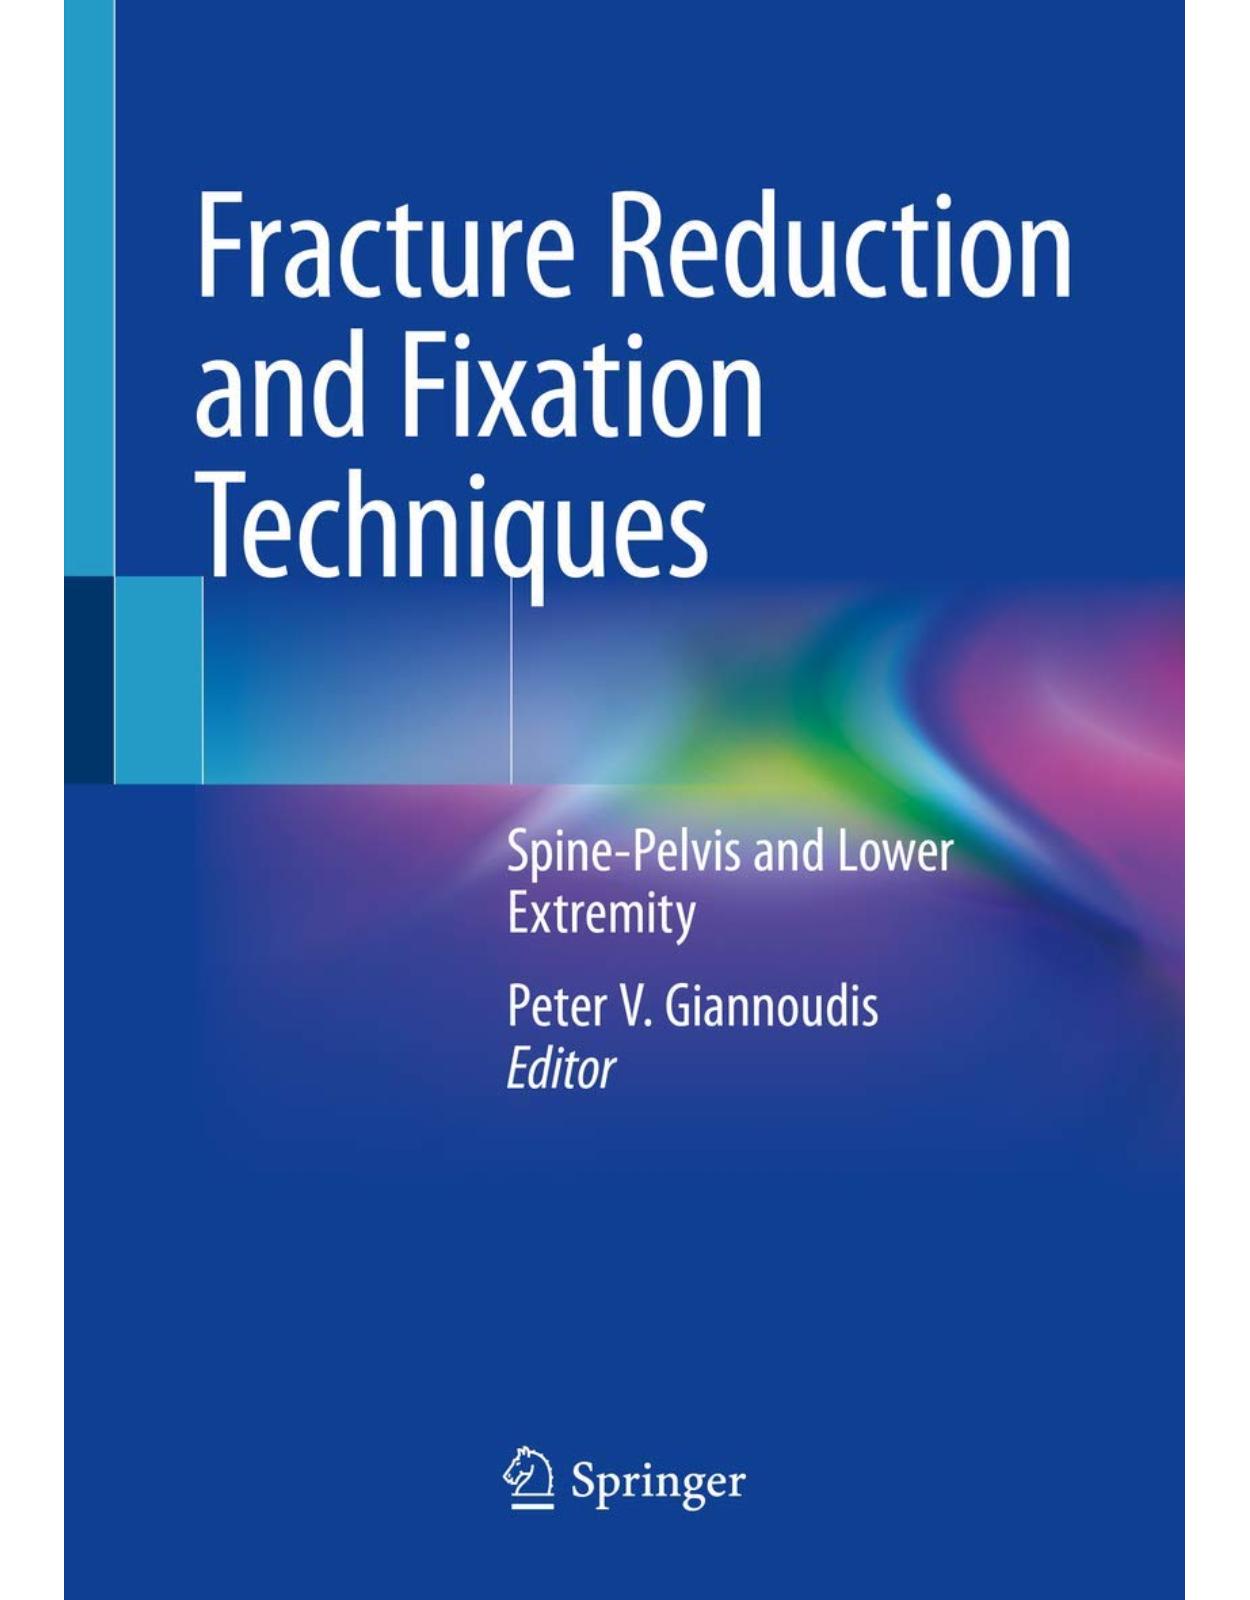 Fracture Reduction and Fixation Techniques: Spine-Pelvis and Lower Extremity